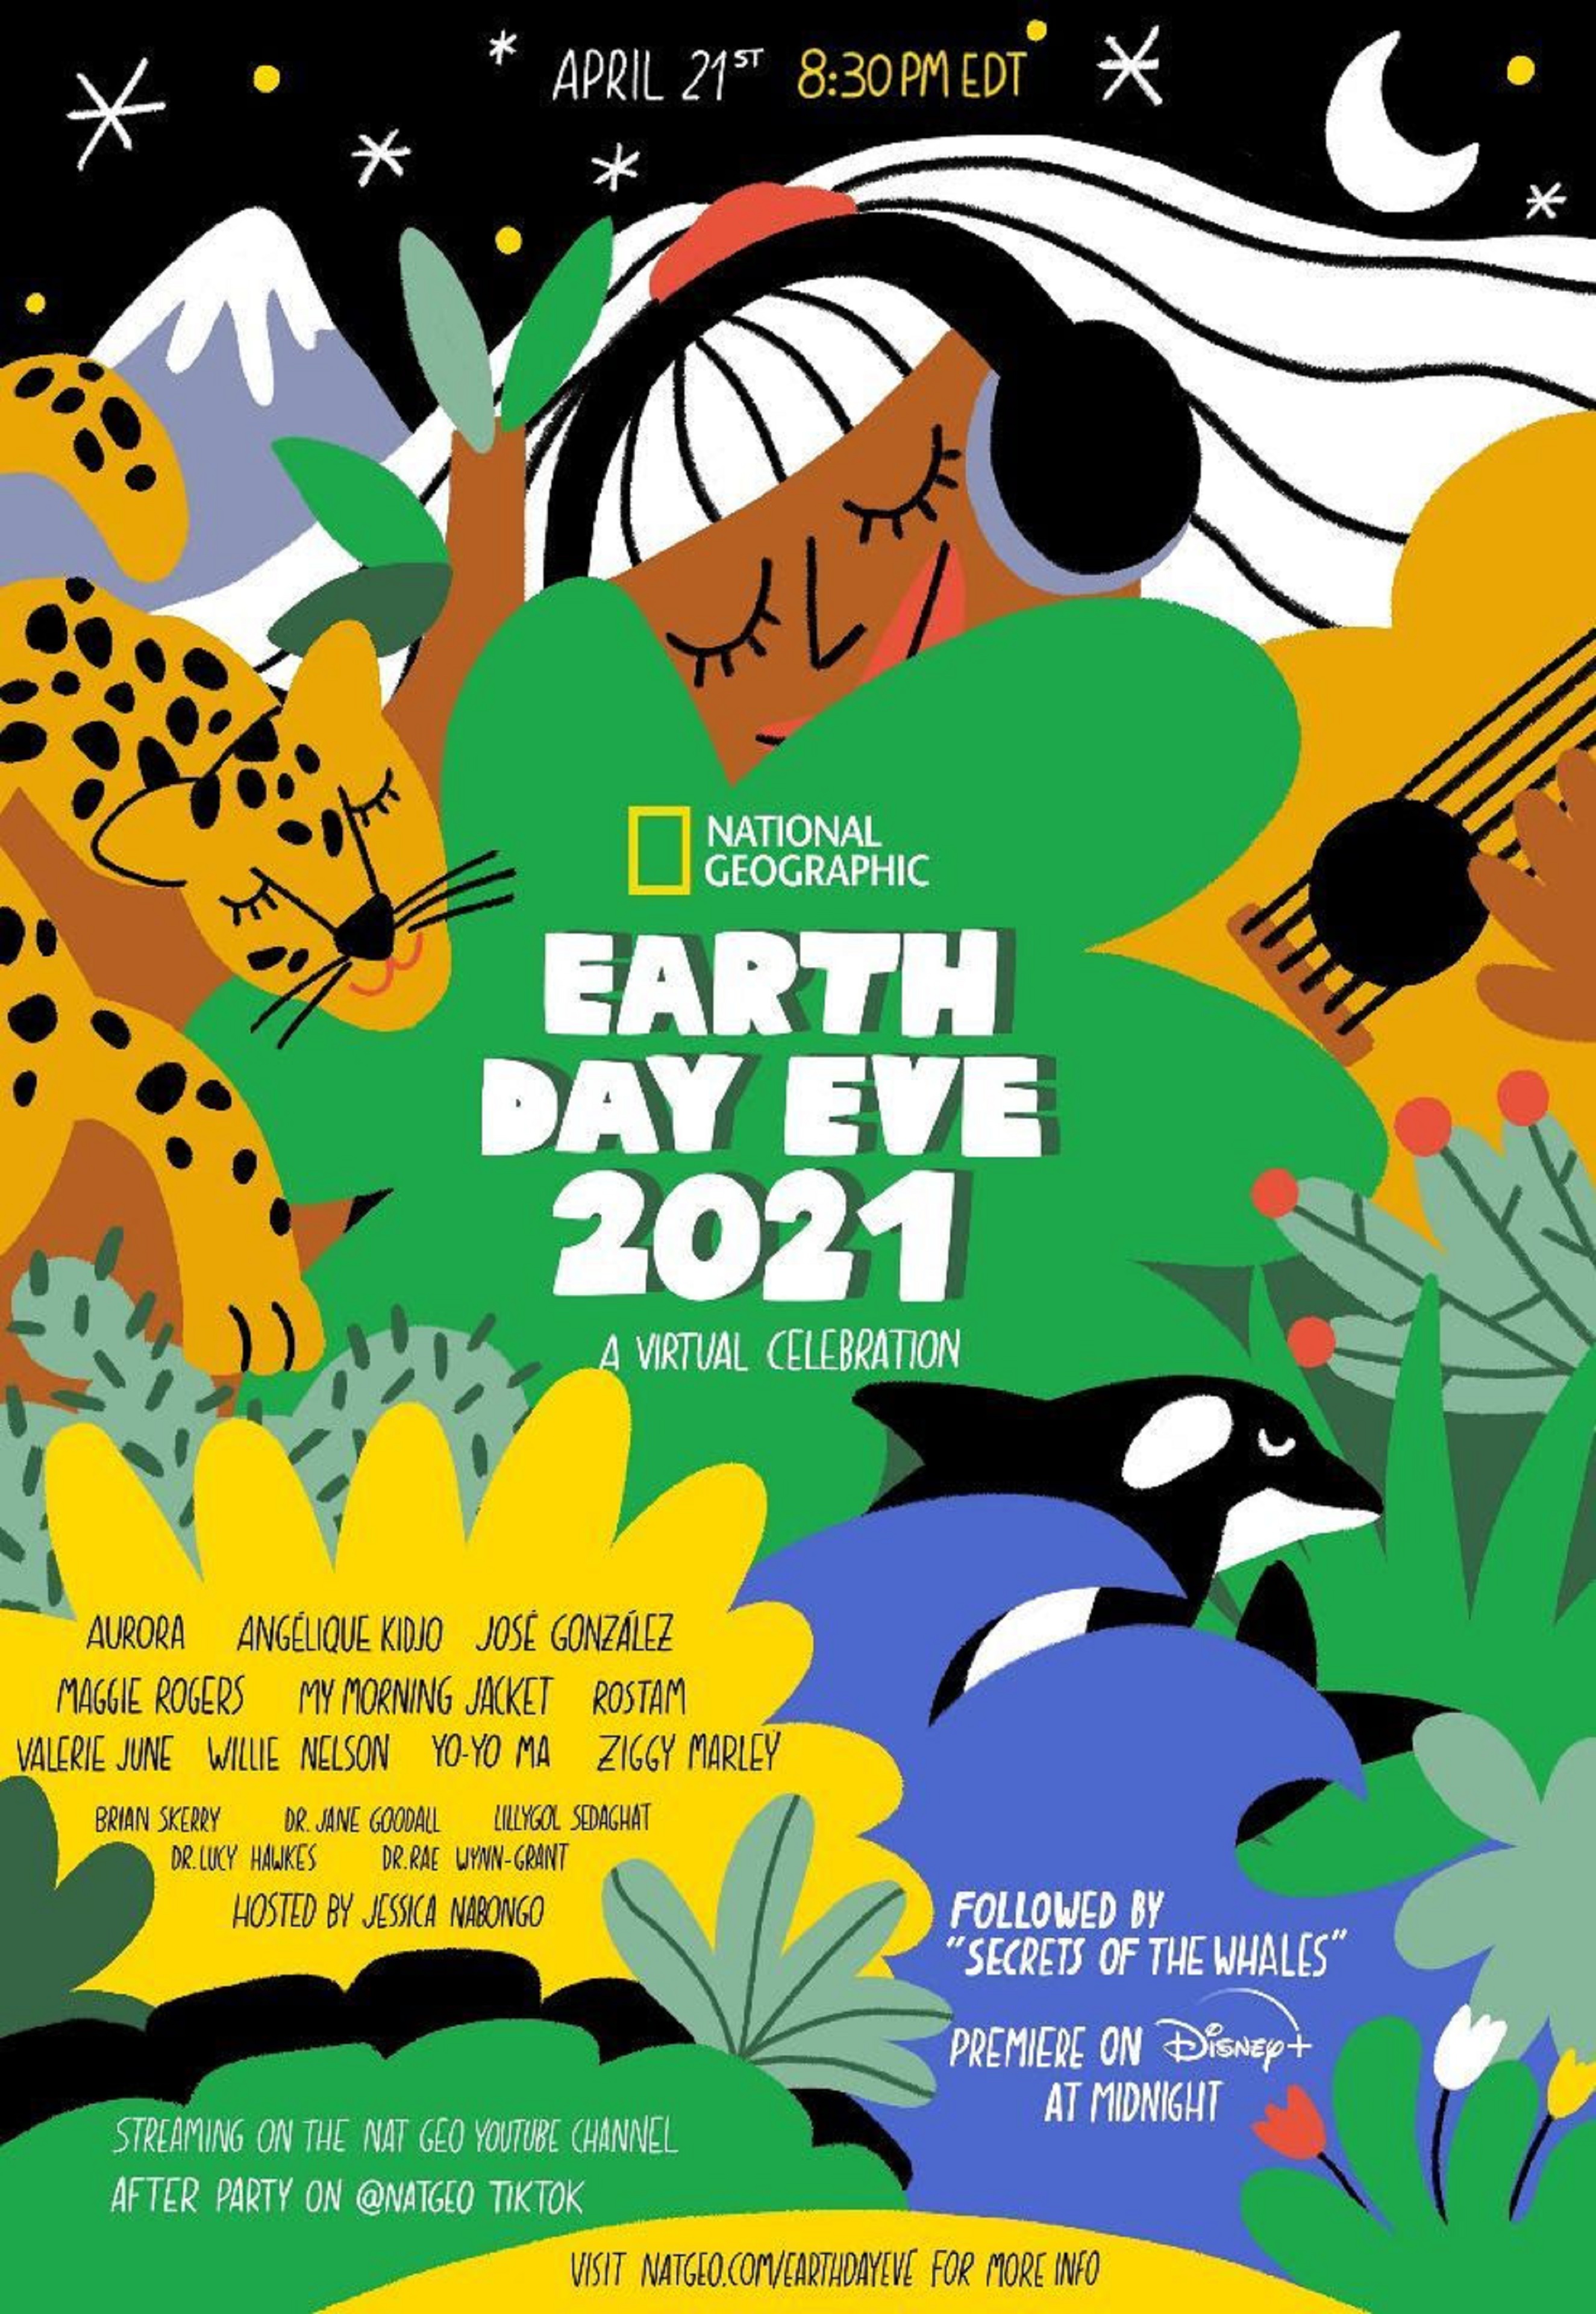 National Geographic Announces Earth Day Eve 2021 Virtual Celebration